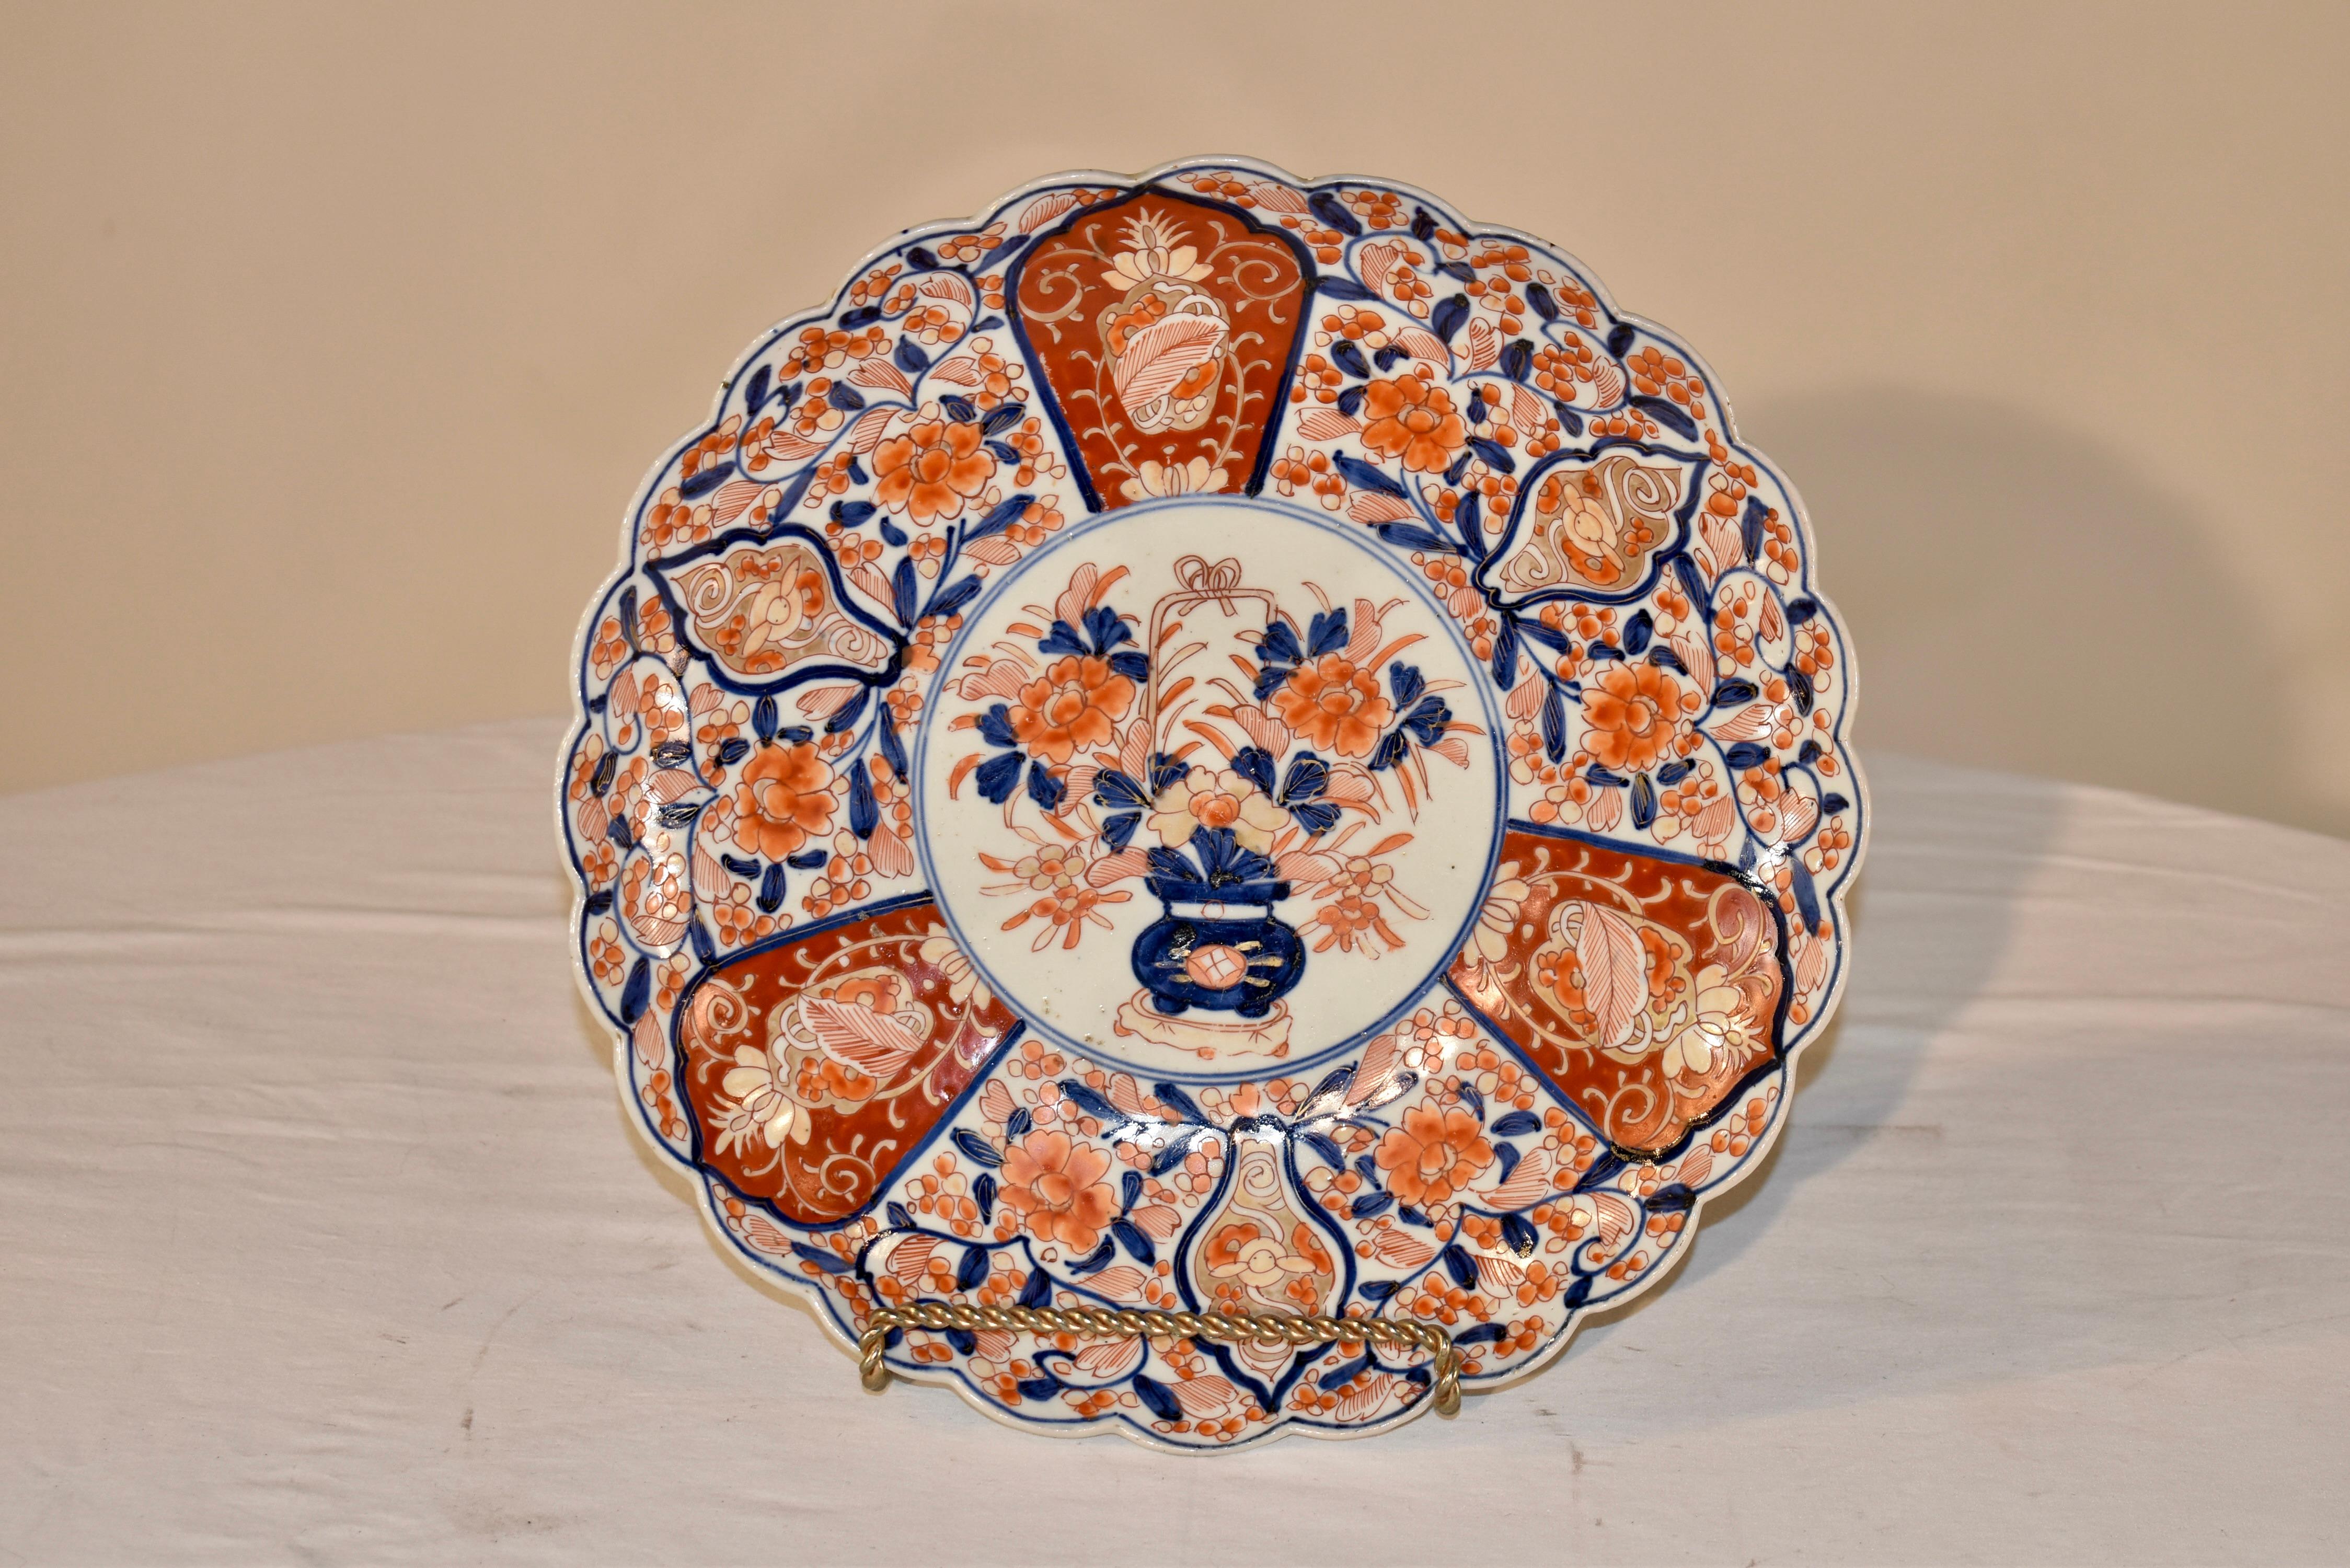 Late 19th century Imari large plate with a lovely scalloped edge. The central medallion is on an ivory colored background with a vase of hand painted florals, surrounded by three blades of burnt orange color with hand painted decorations, flanked by